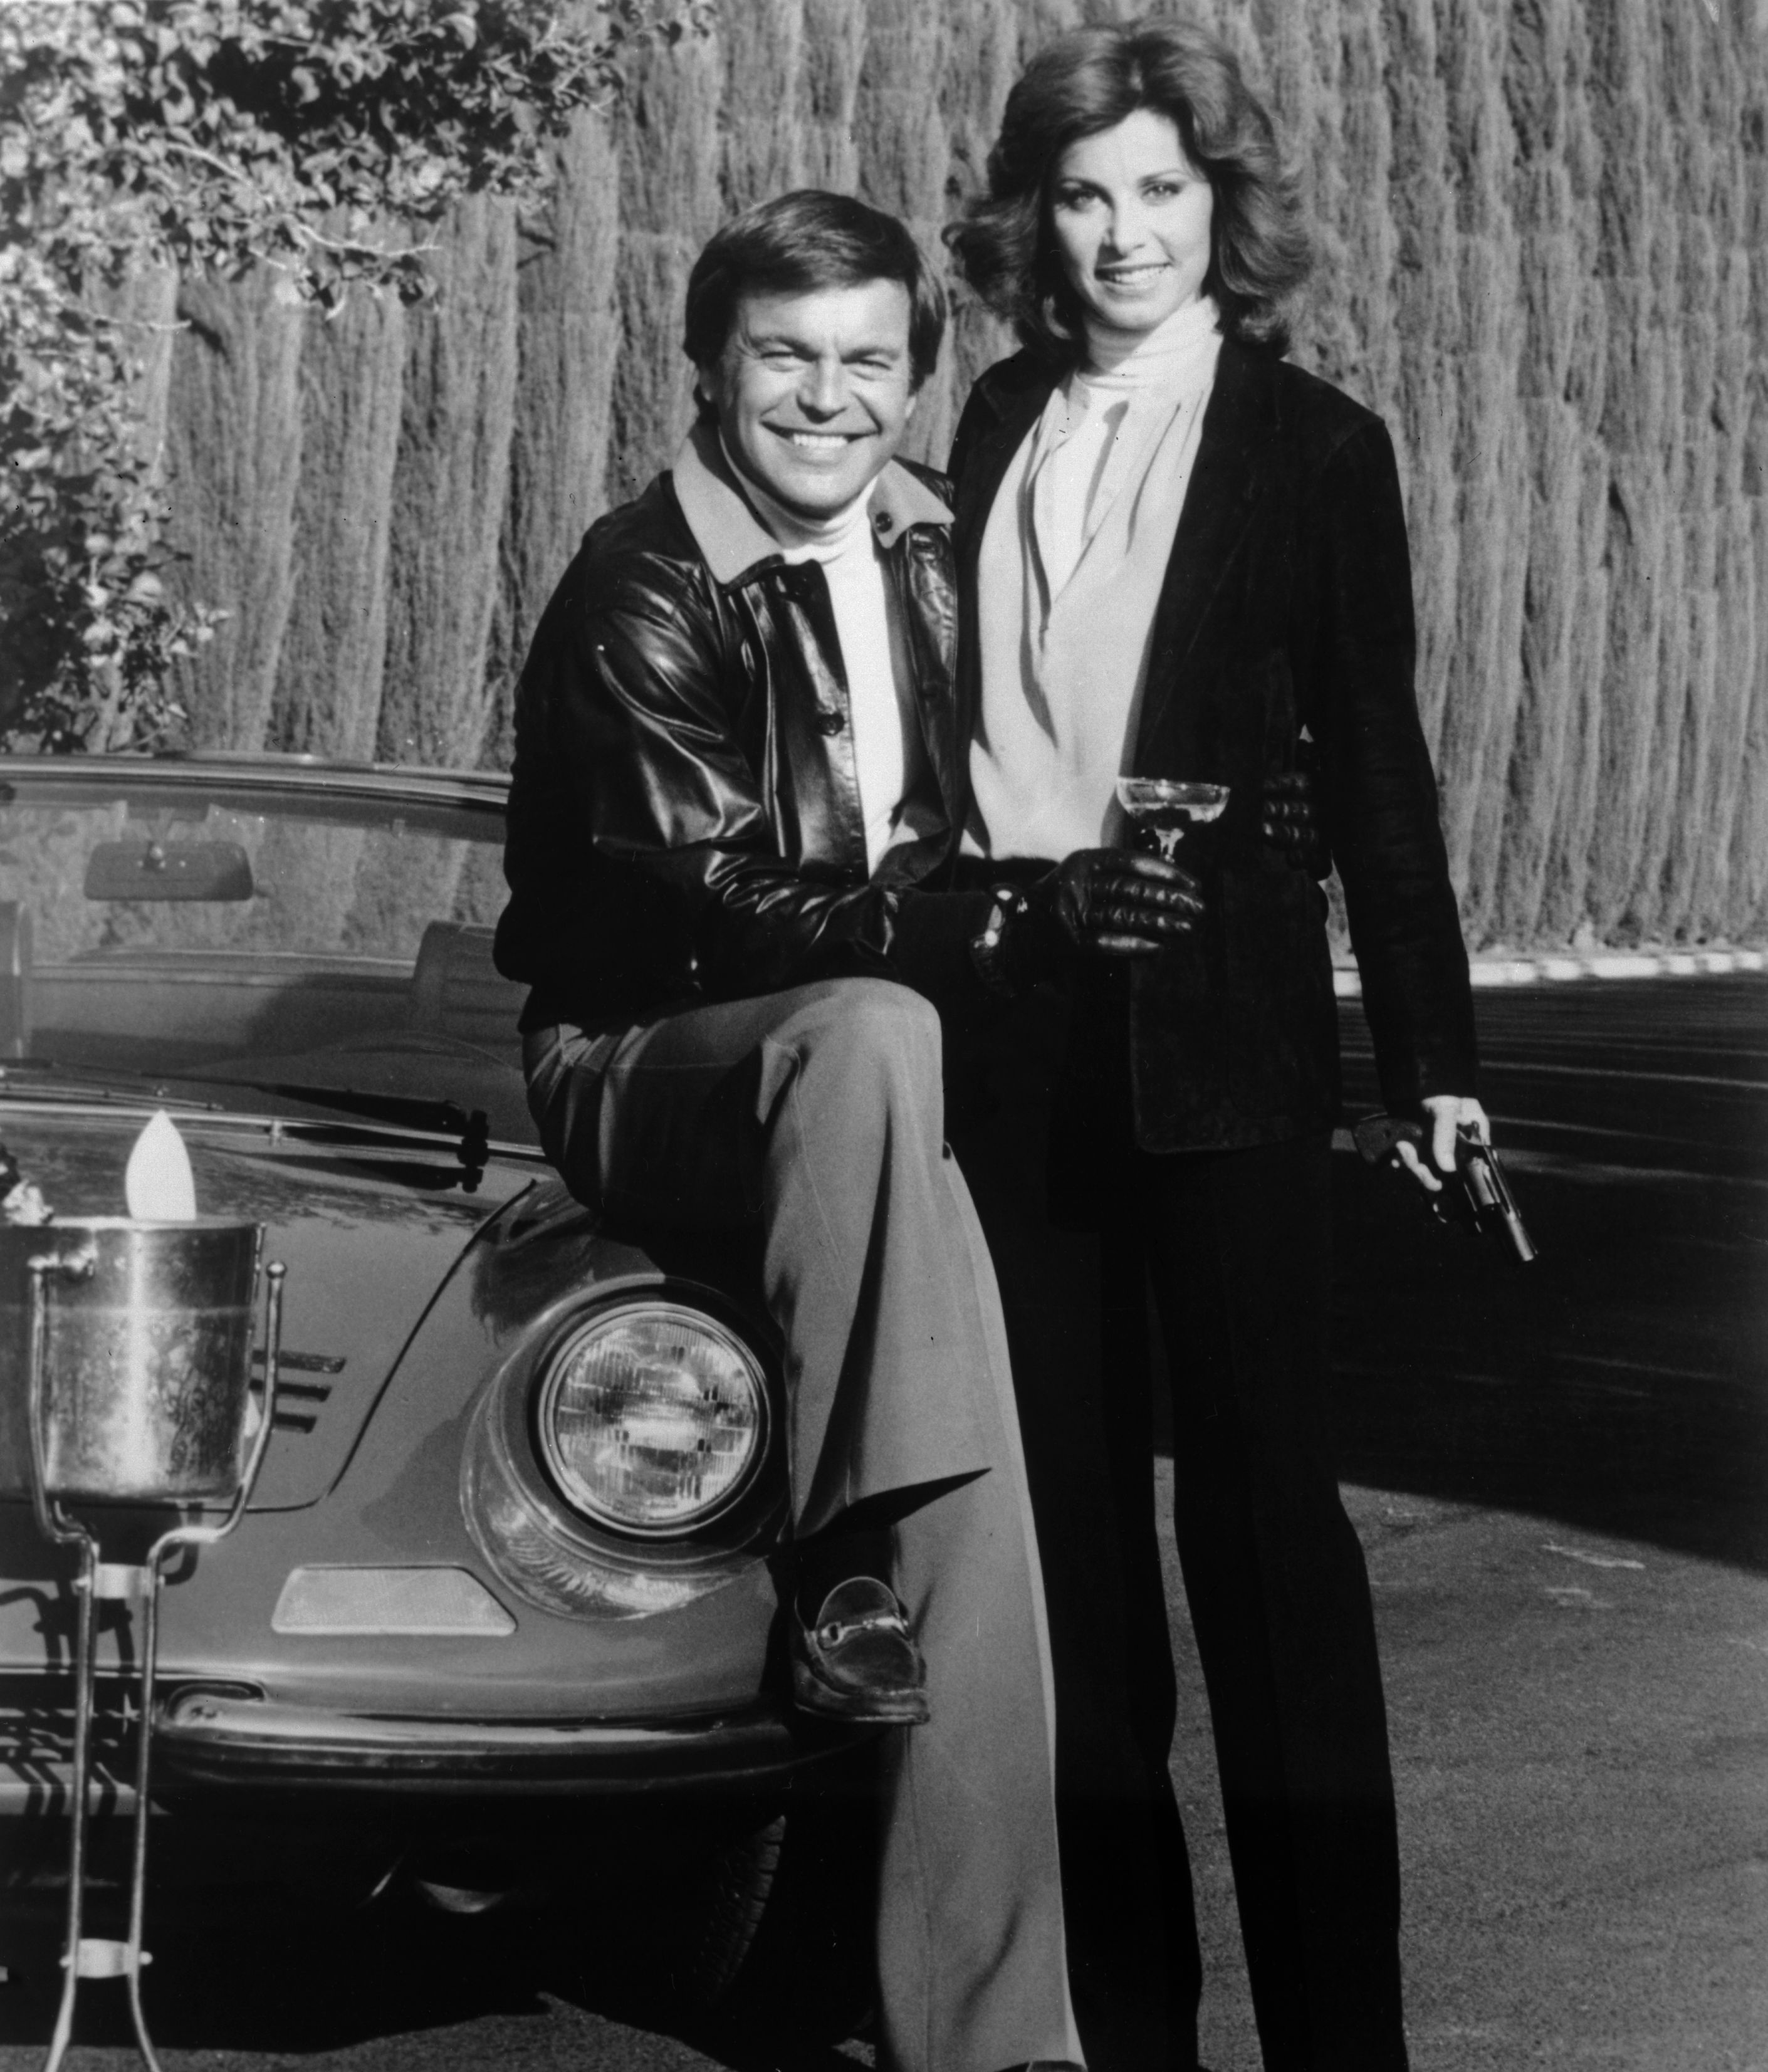 American film and TV stars Robert Wagner and Stefanie Powers as they appear in their TV series 'Hart to Hart' about a wealthy husband and wife who work together as private detectives. | Source: Getty Images